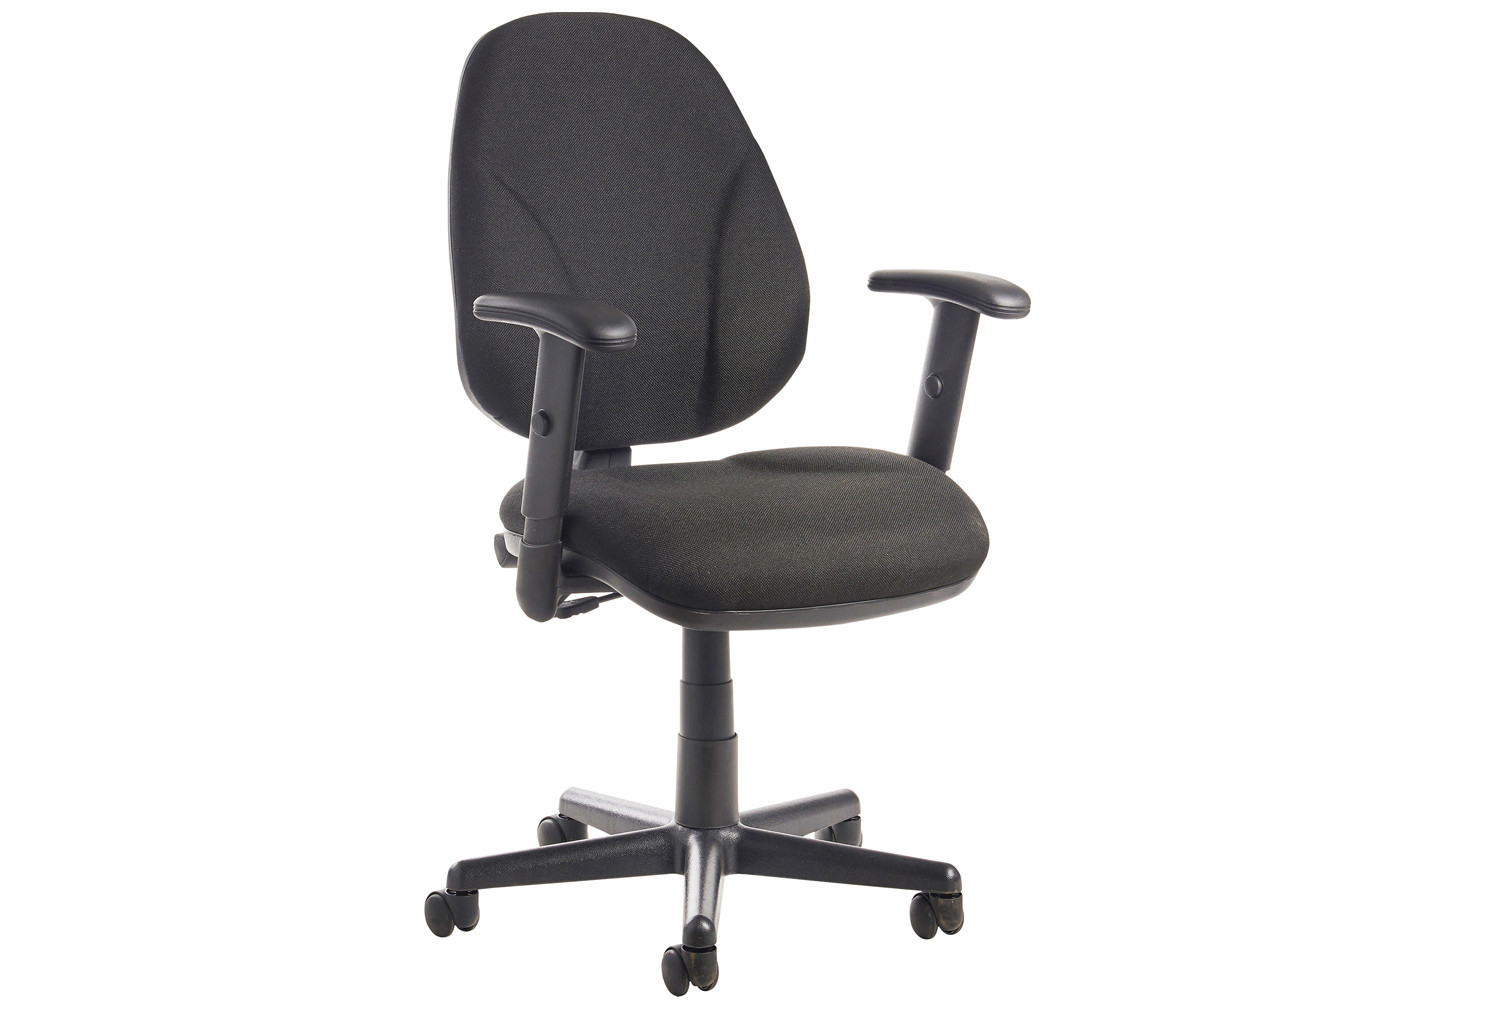 All Black 1 Lever High Back Fabric Operator Office Chair With Adjustable Arms, Fully Installed